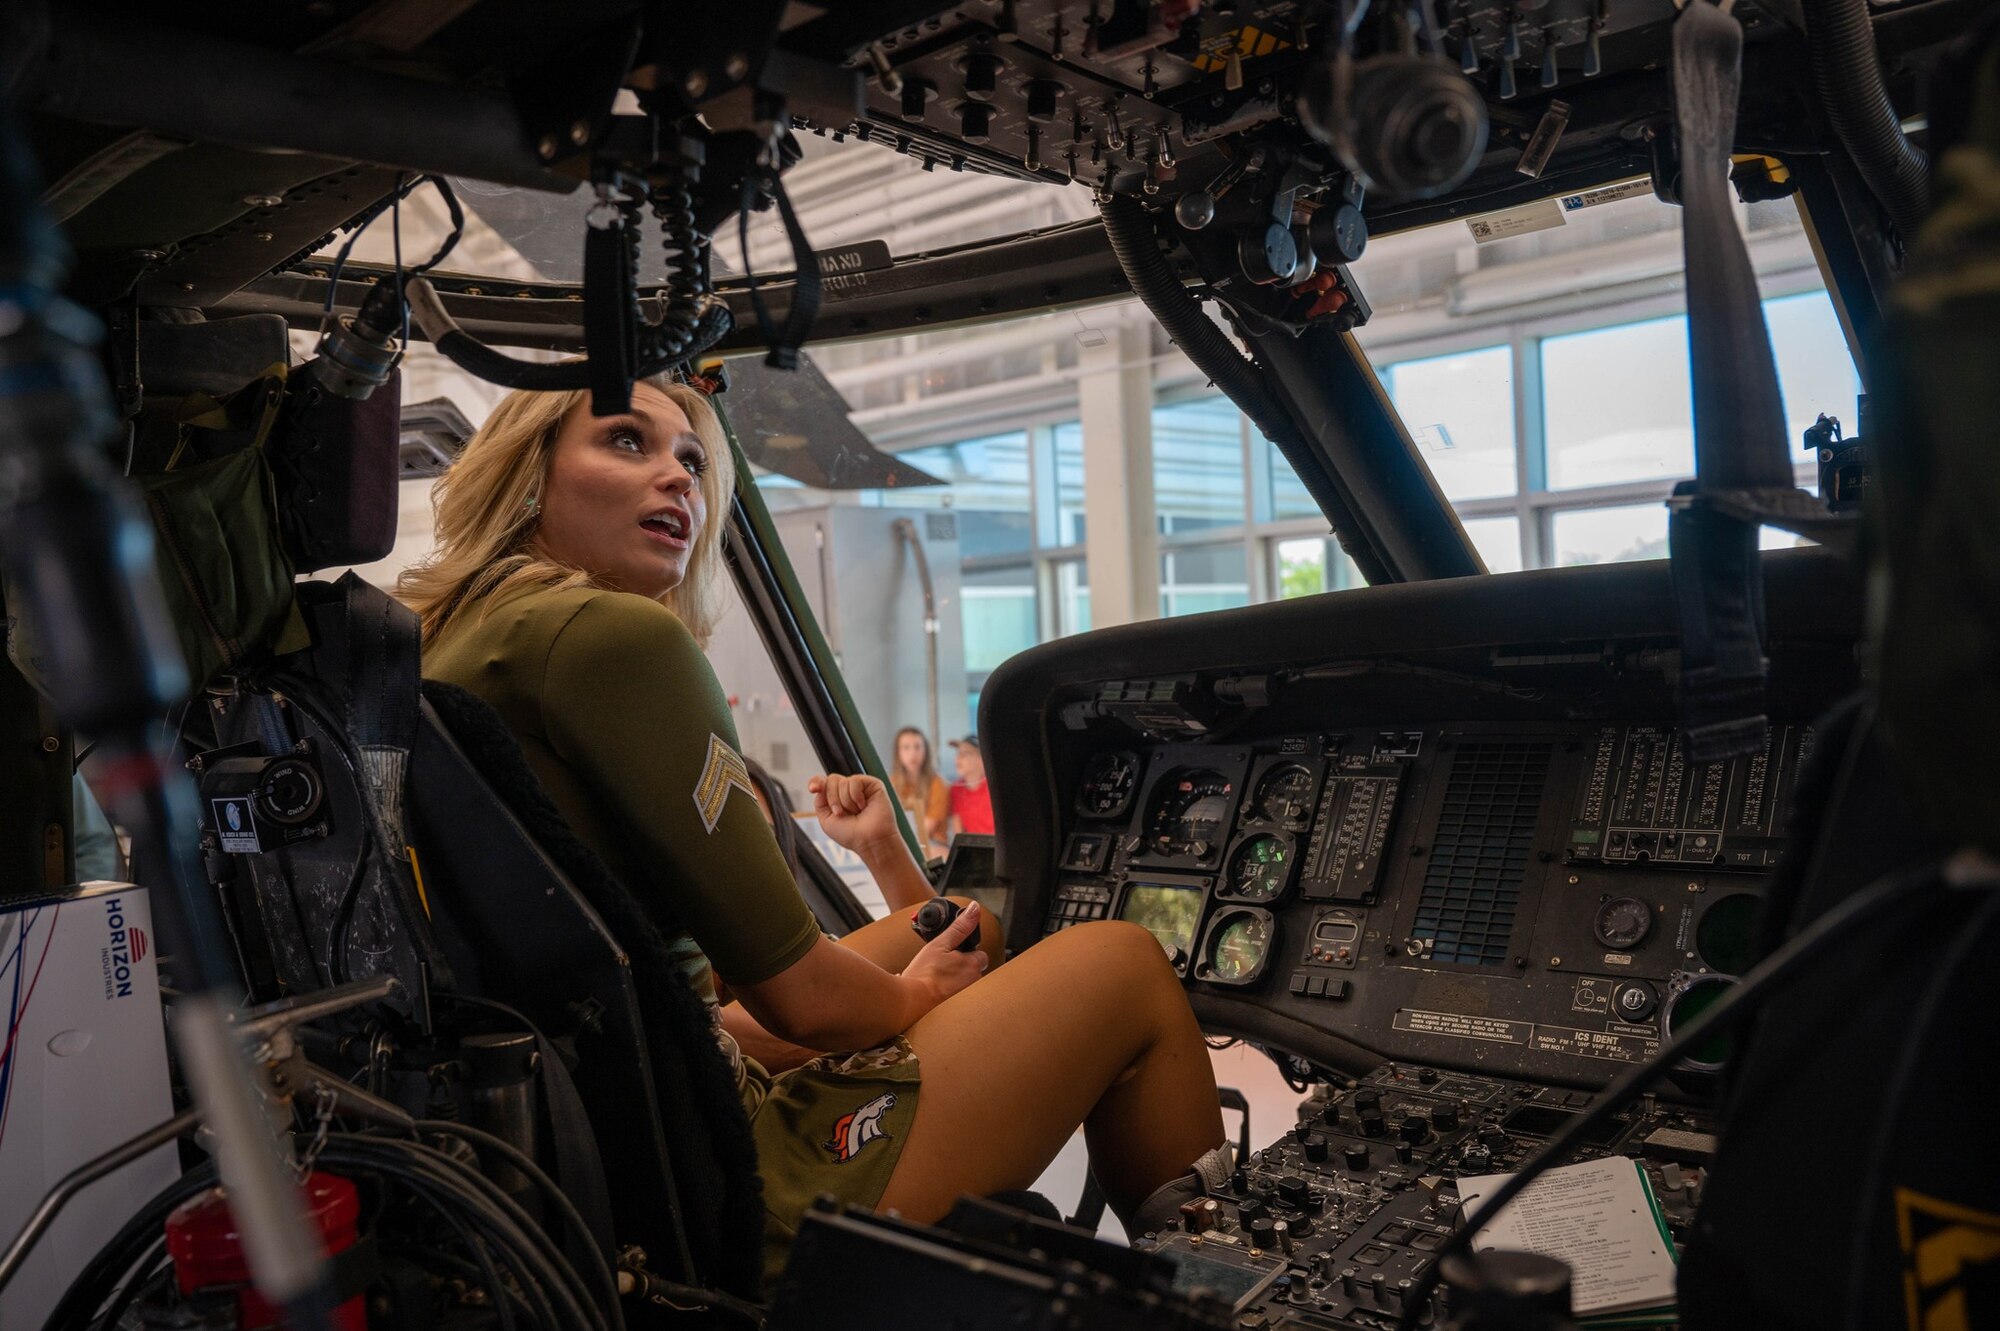 A Denver Broncos cheerleader sits inside a UH-60 Black Hawk helicopter at Army Aviation on Buckley Space Force Base, Colo., July 8, 2022. Members from the Denver Broncos learned about various aircraft while visiting Army Aviation. (U.S. Space Force photo by Senior Airman Haley N. Blevins)